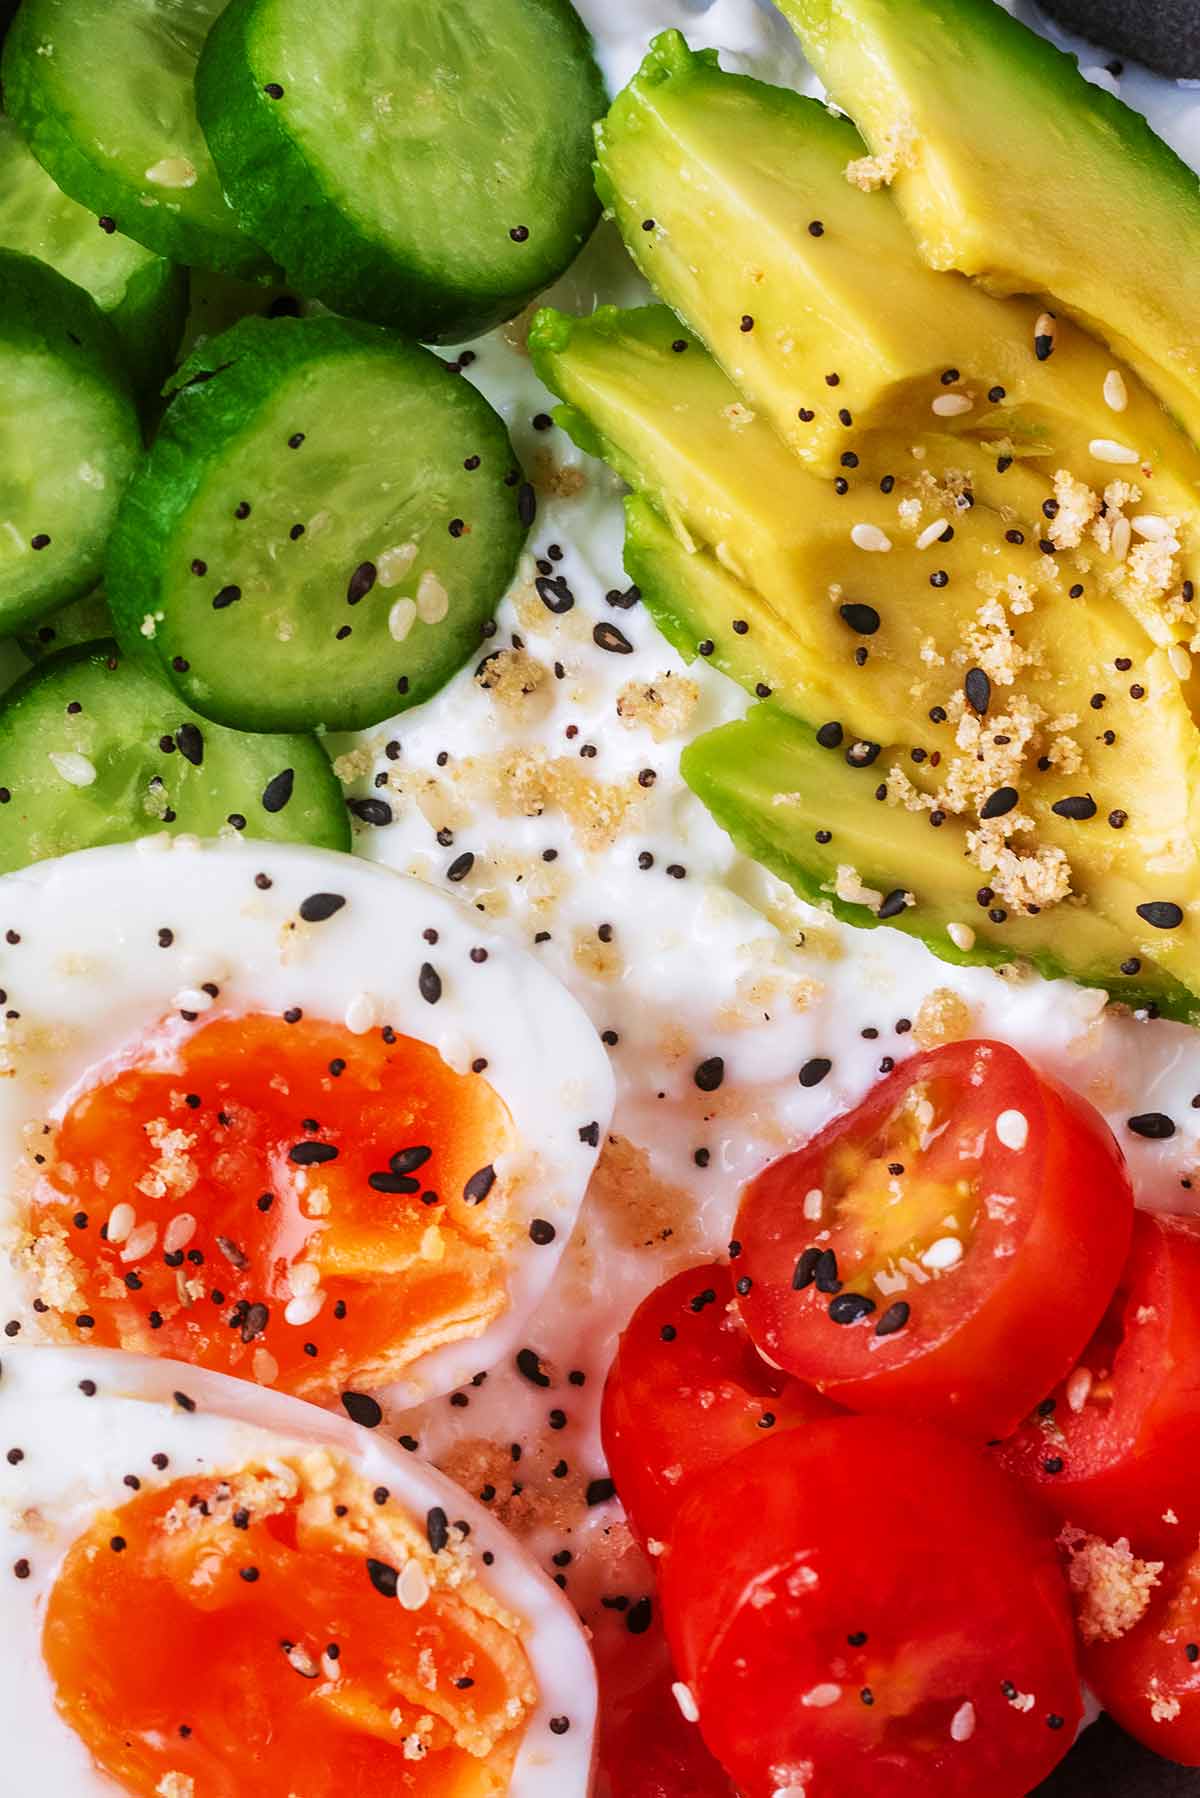 A boiled egg cut in half next to avocado, tomatoes and cucumber on top of cottage cheese.